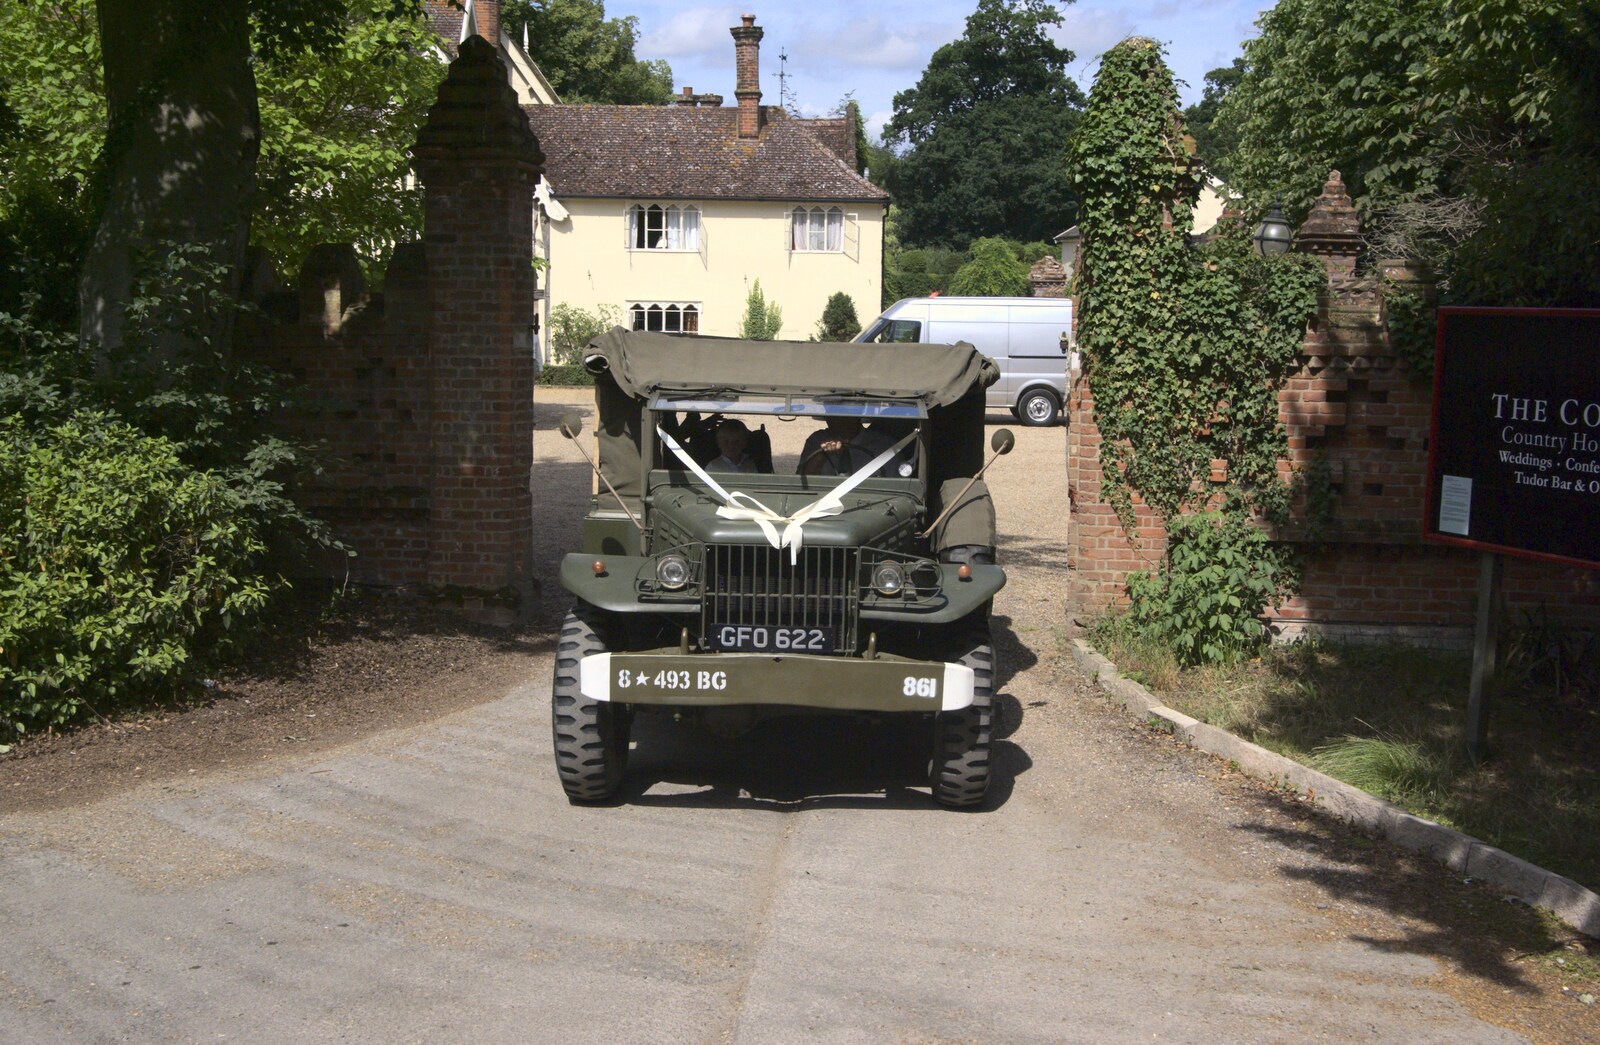 A Jeep heads out of the Cornwallis from Clive and Suzanne's Wedding, Oakley and Brome, Suffolk - 10th July 2010